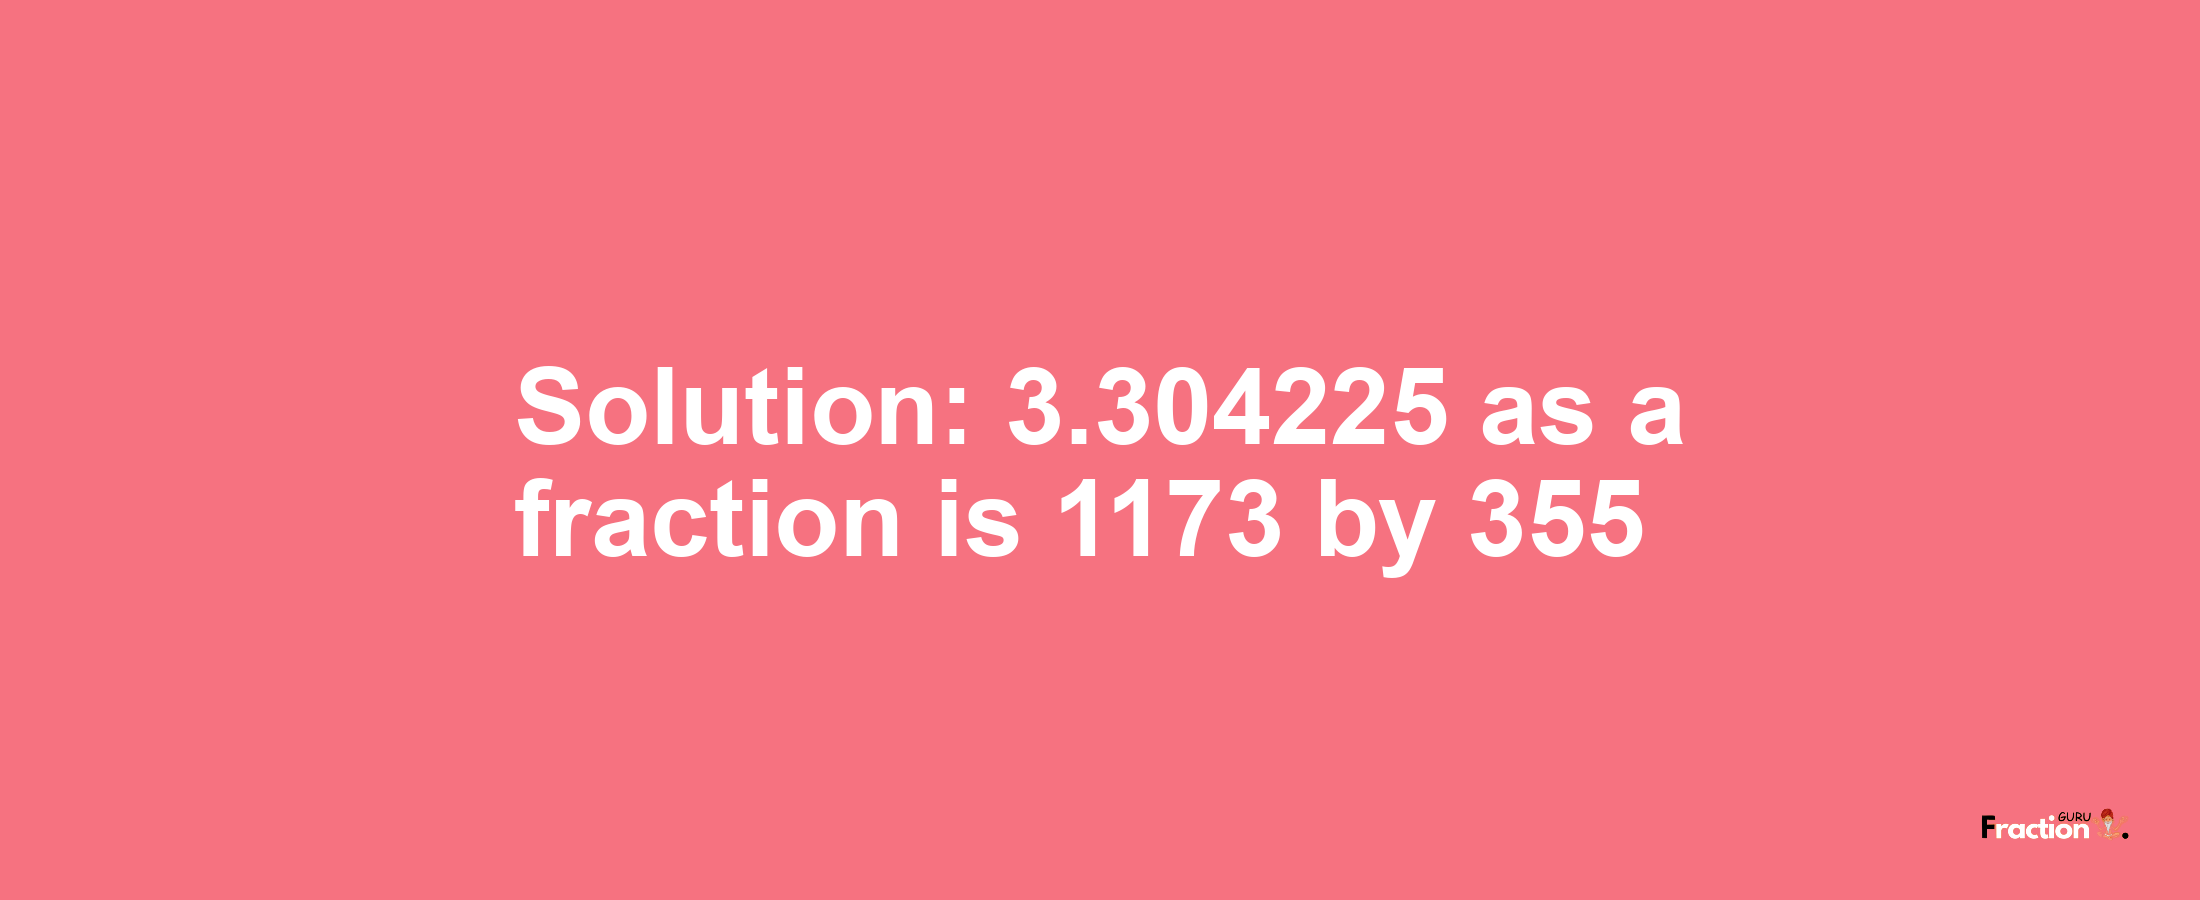 Solution:3.304225 as a fraction is 1173/355